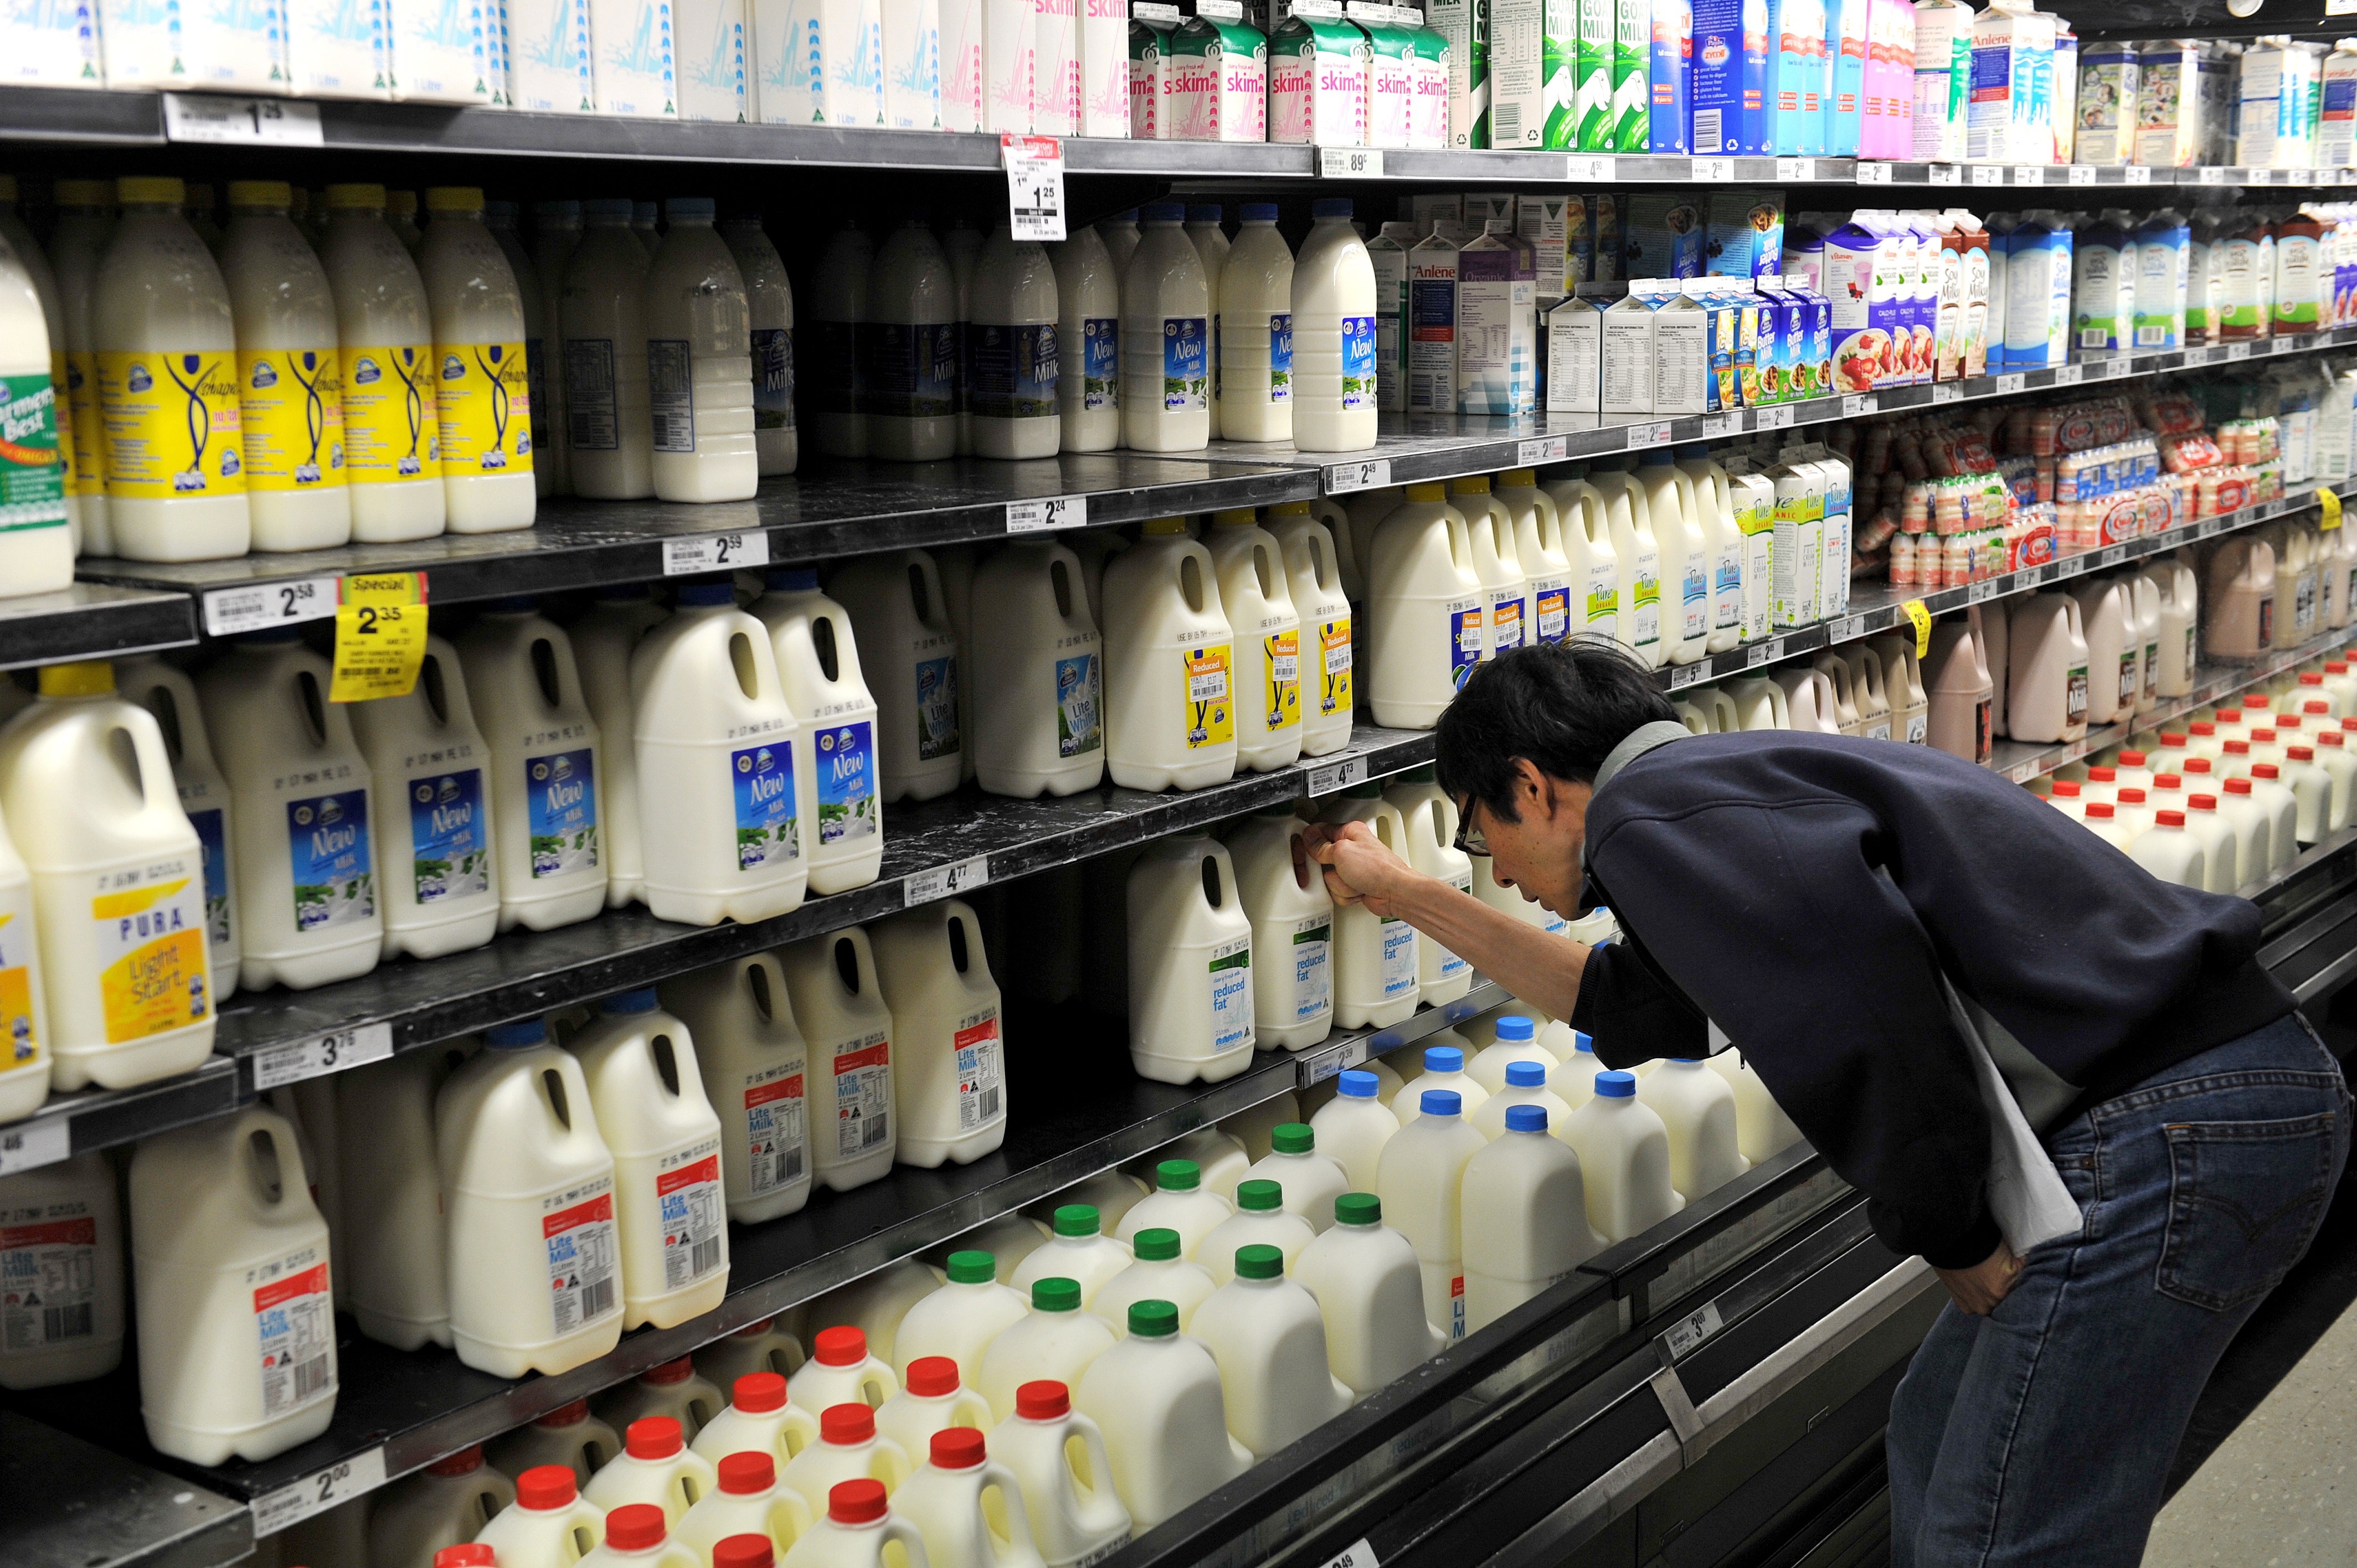 A shopper selects a bottle of milk at a supermarket in Sydney on Monday, May 7, 2012. (AAP Image/Paul Miller) NO ARCHIVING